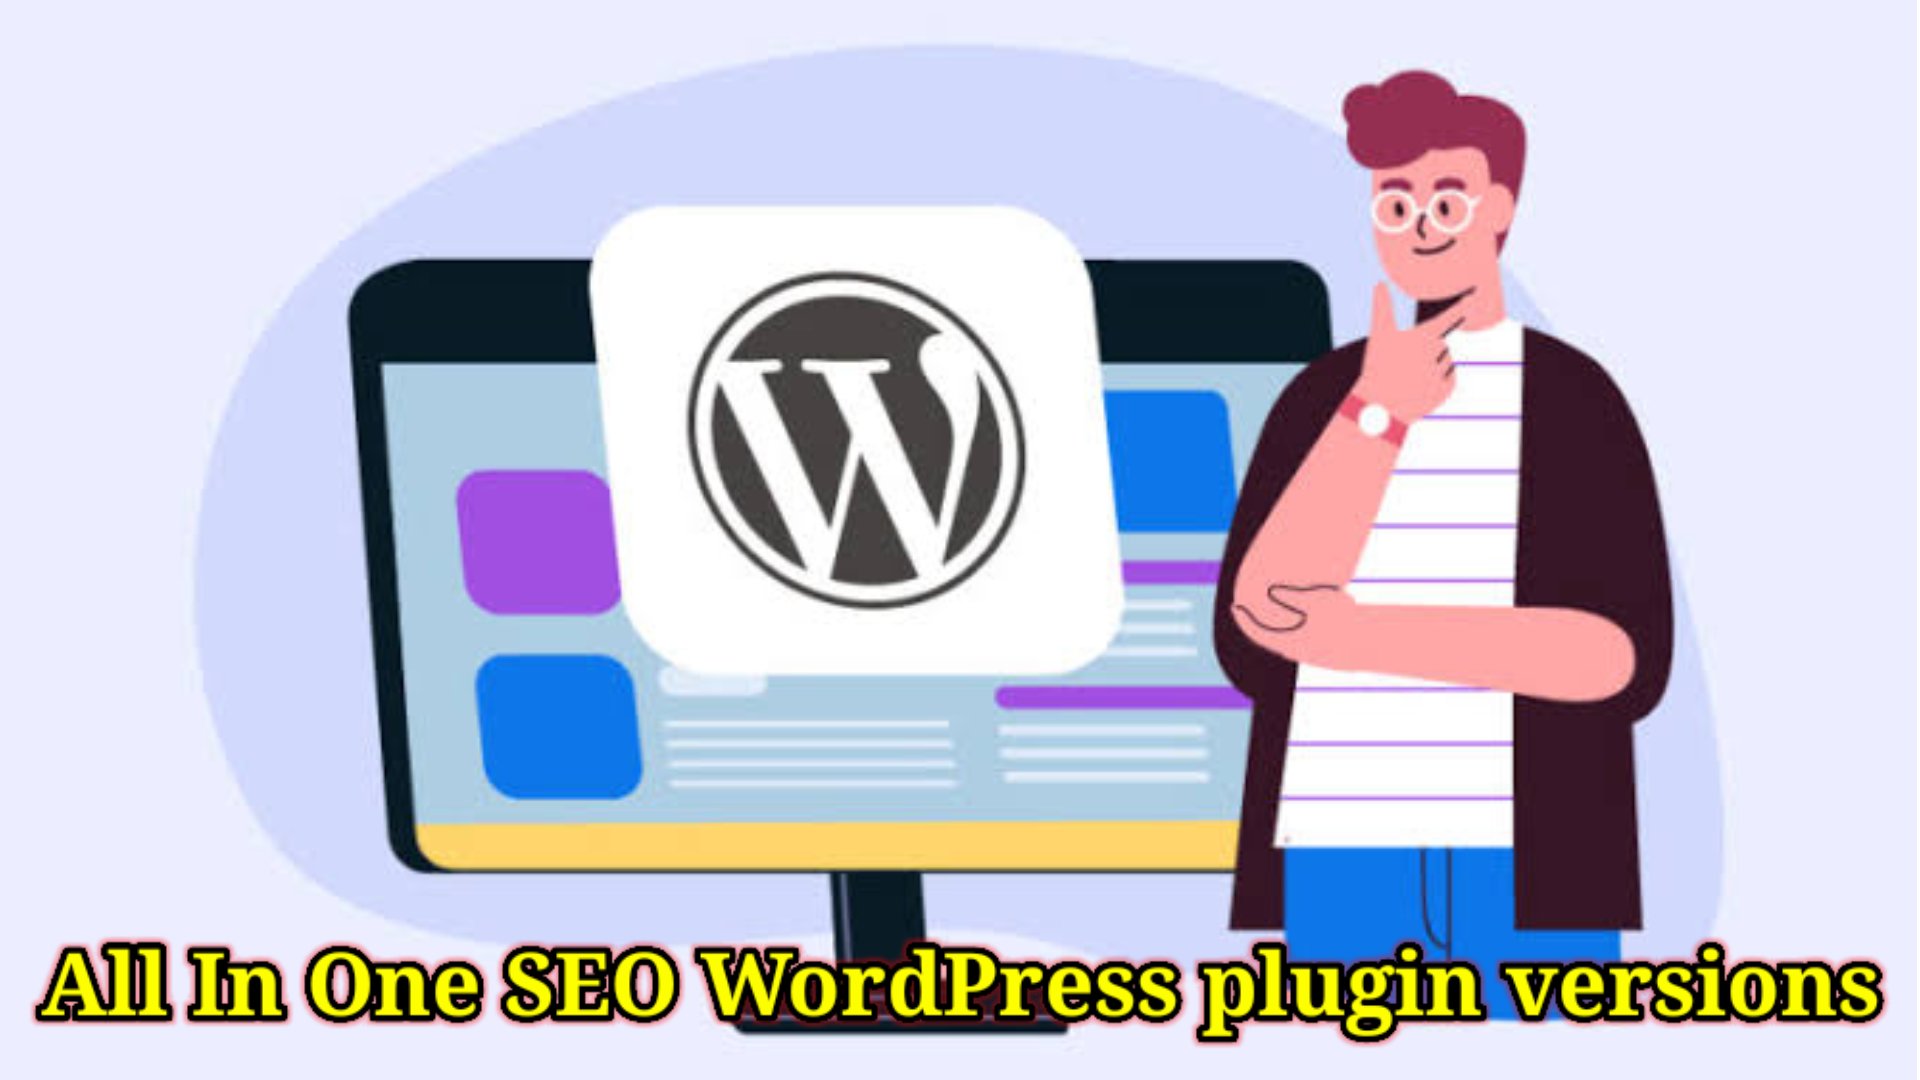 All In One SEO WordPress plugin versions up to and including 4.2.9 are vulnerable to stored cross-site scripting attacks